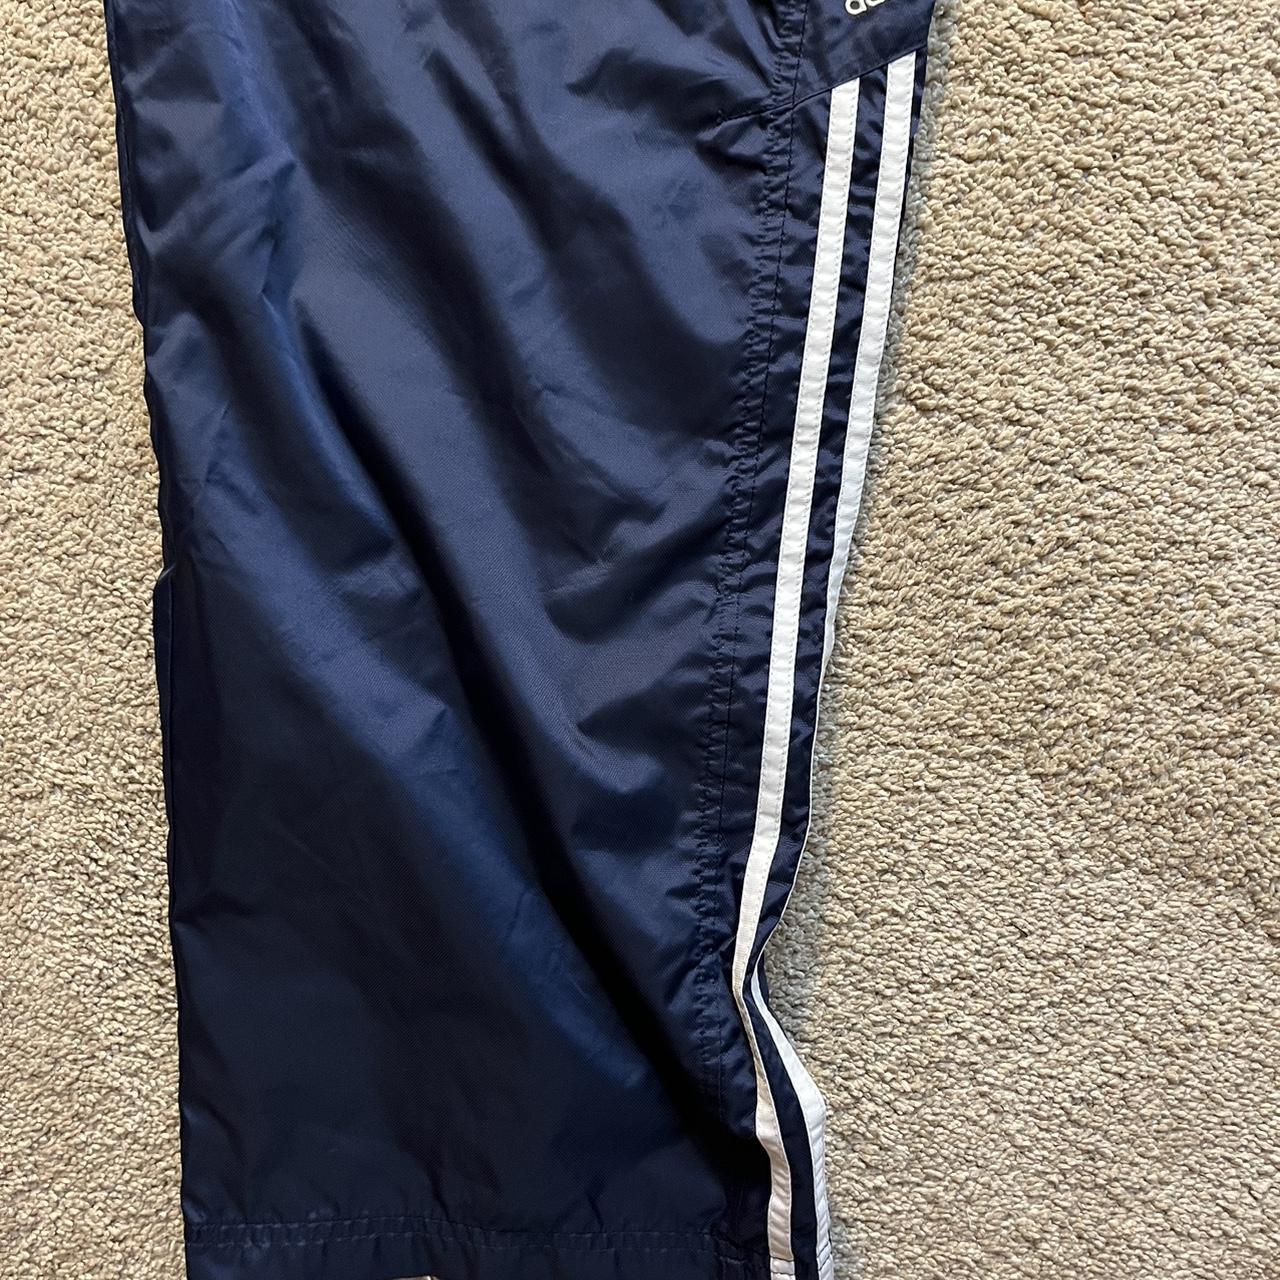 Y2k Adidas track pants! Size L Dm with any questions:) - Depop